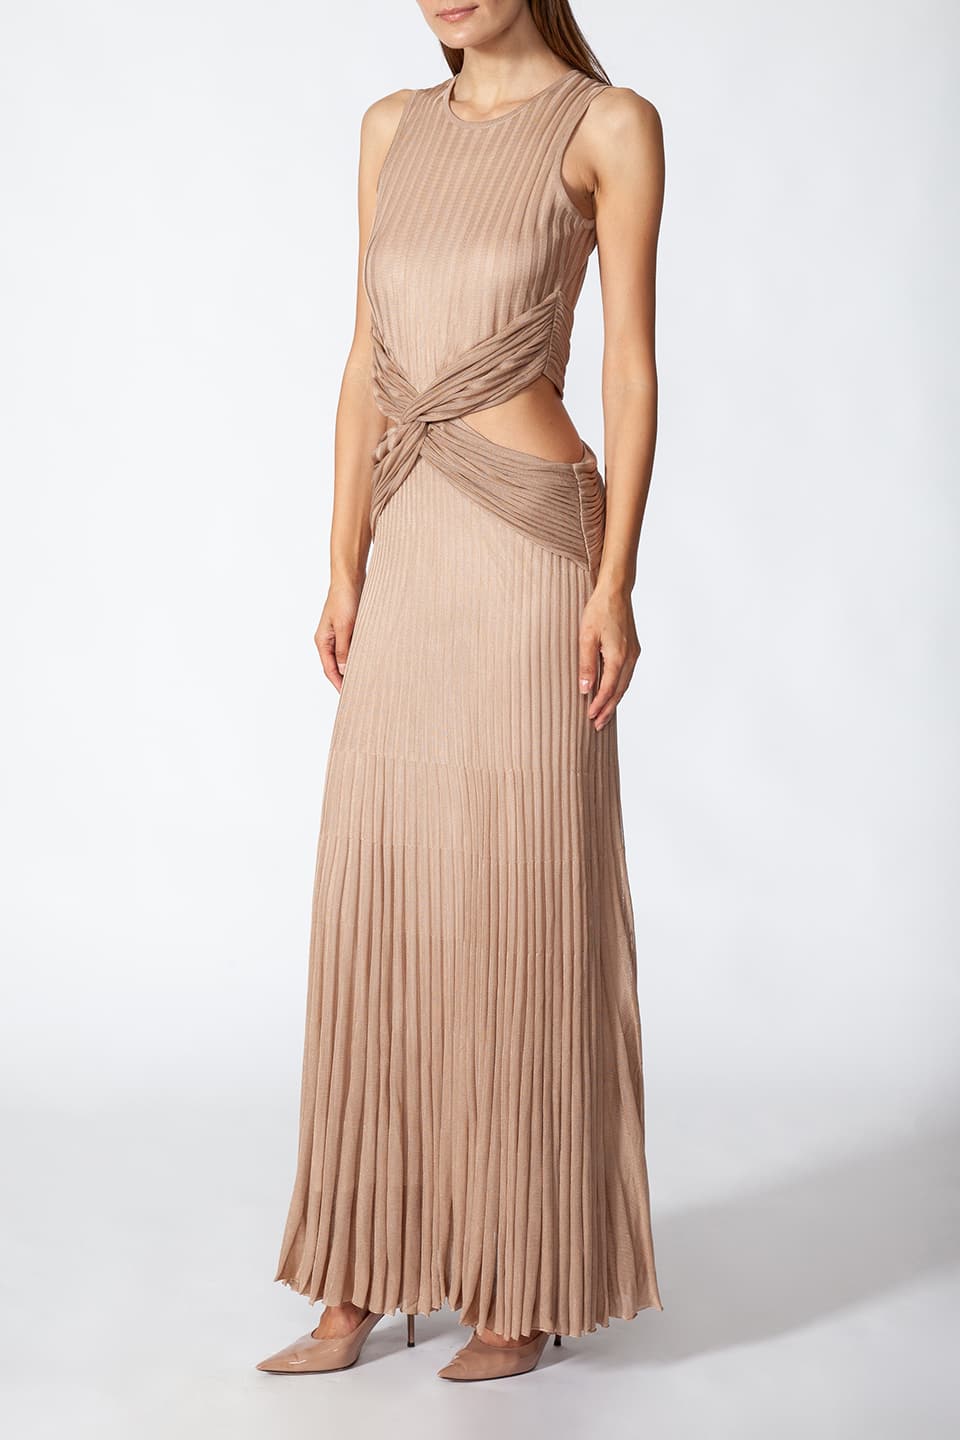 Model in pose wearing Fashion Stylist Kukhareva London's elegant gold dress. Long evening dress crafted from gold viscose blend featuring round neckline.